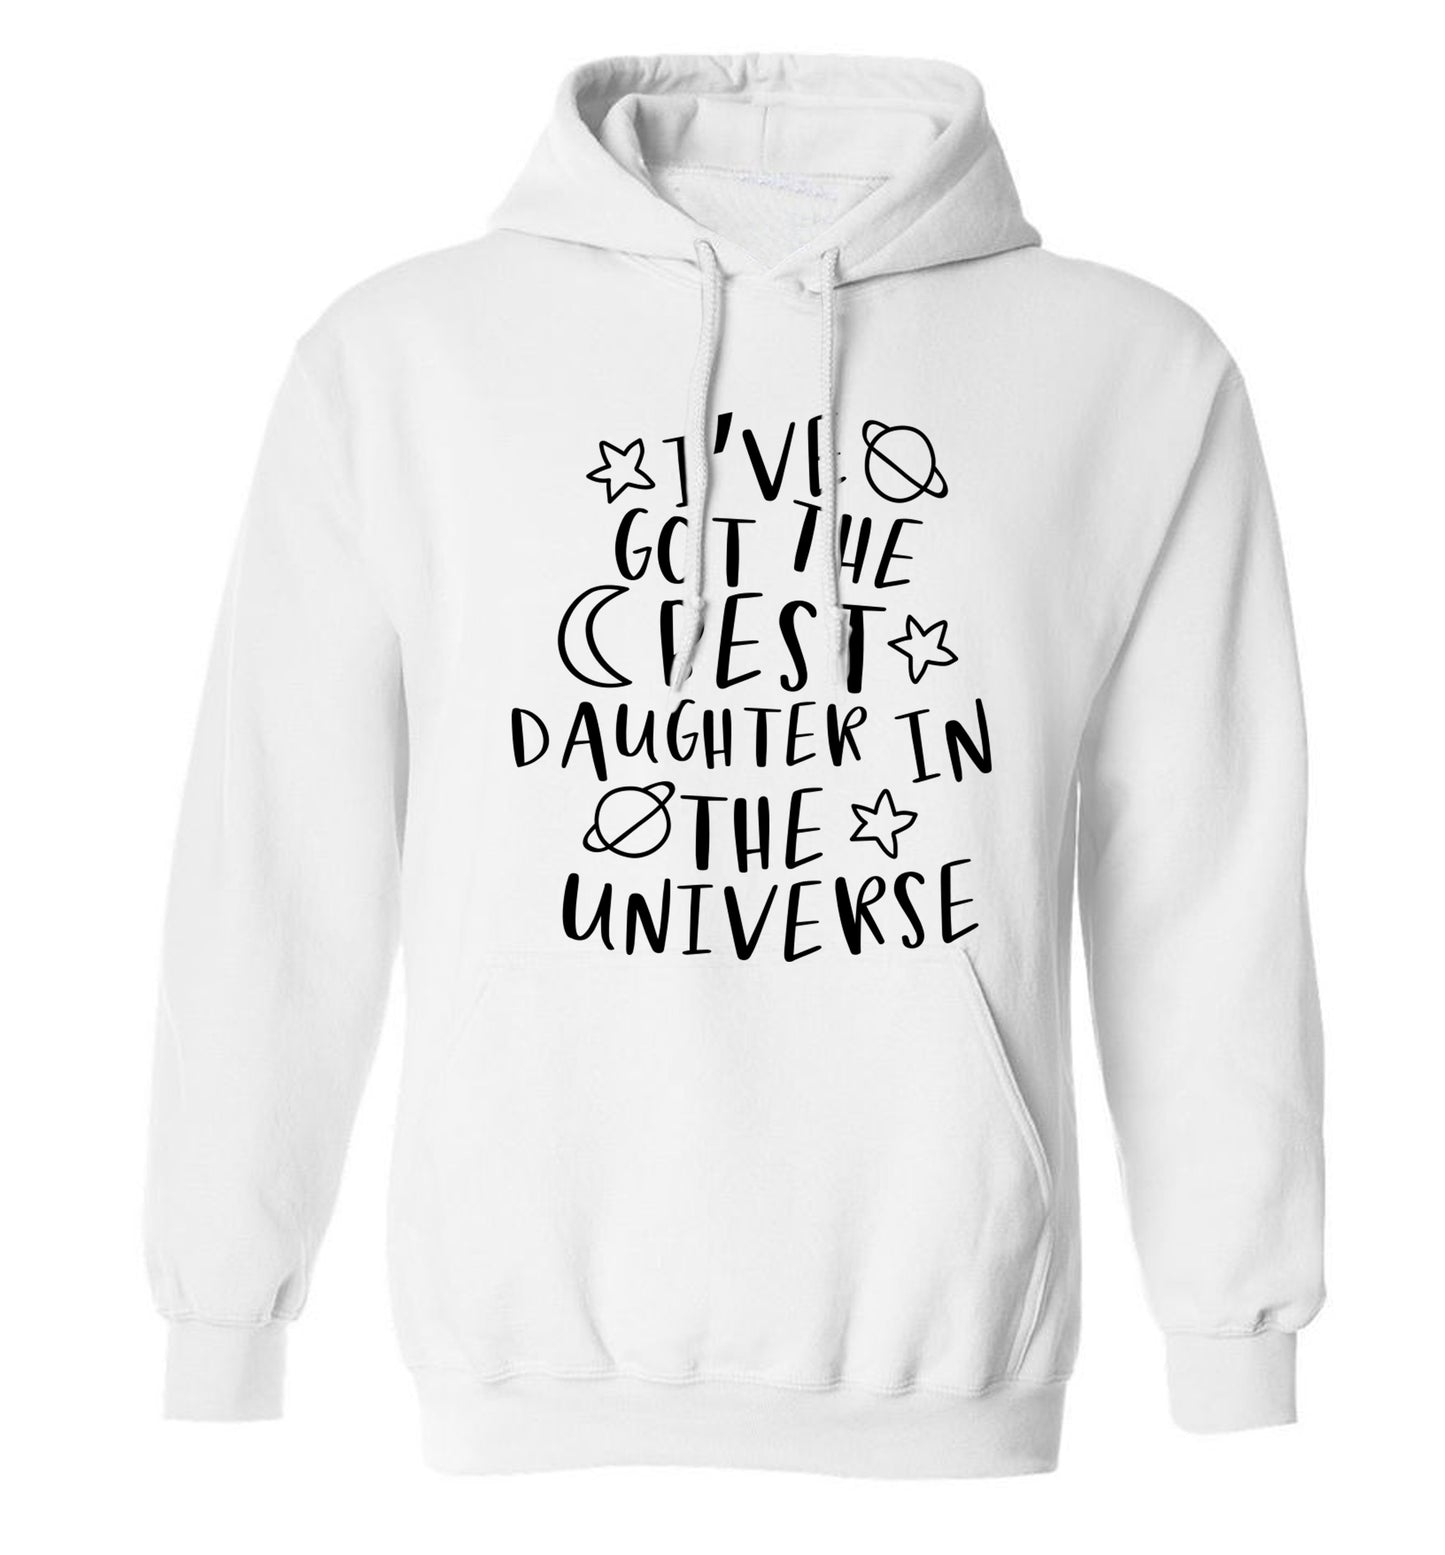 I've got the best daughter in the universe adults unisex white hoodie 2XL